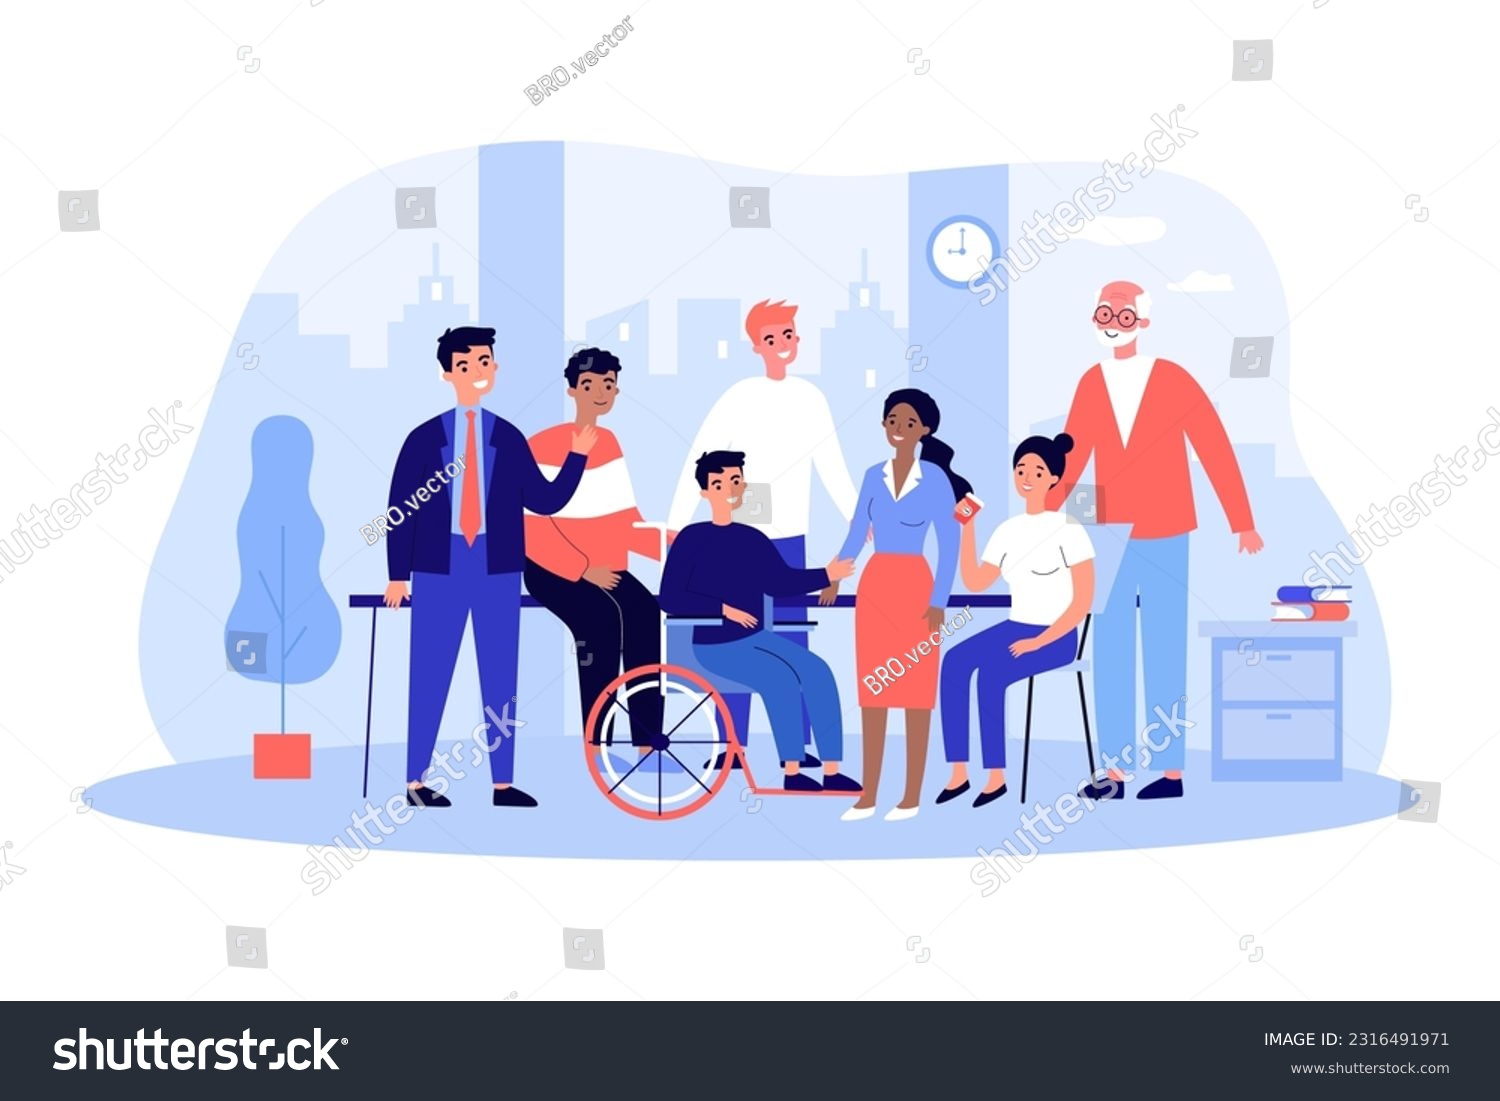 SVG of Group of happy diverse coworkers vector illustration. Inclusive team of people with disability and people of different age and race working together. Diversity, teamwork, inclusion, business concept svg